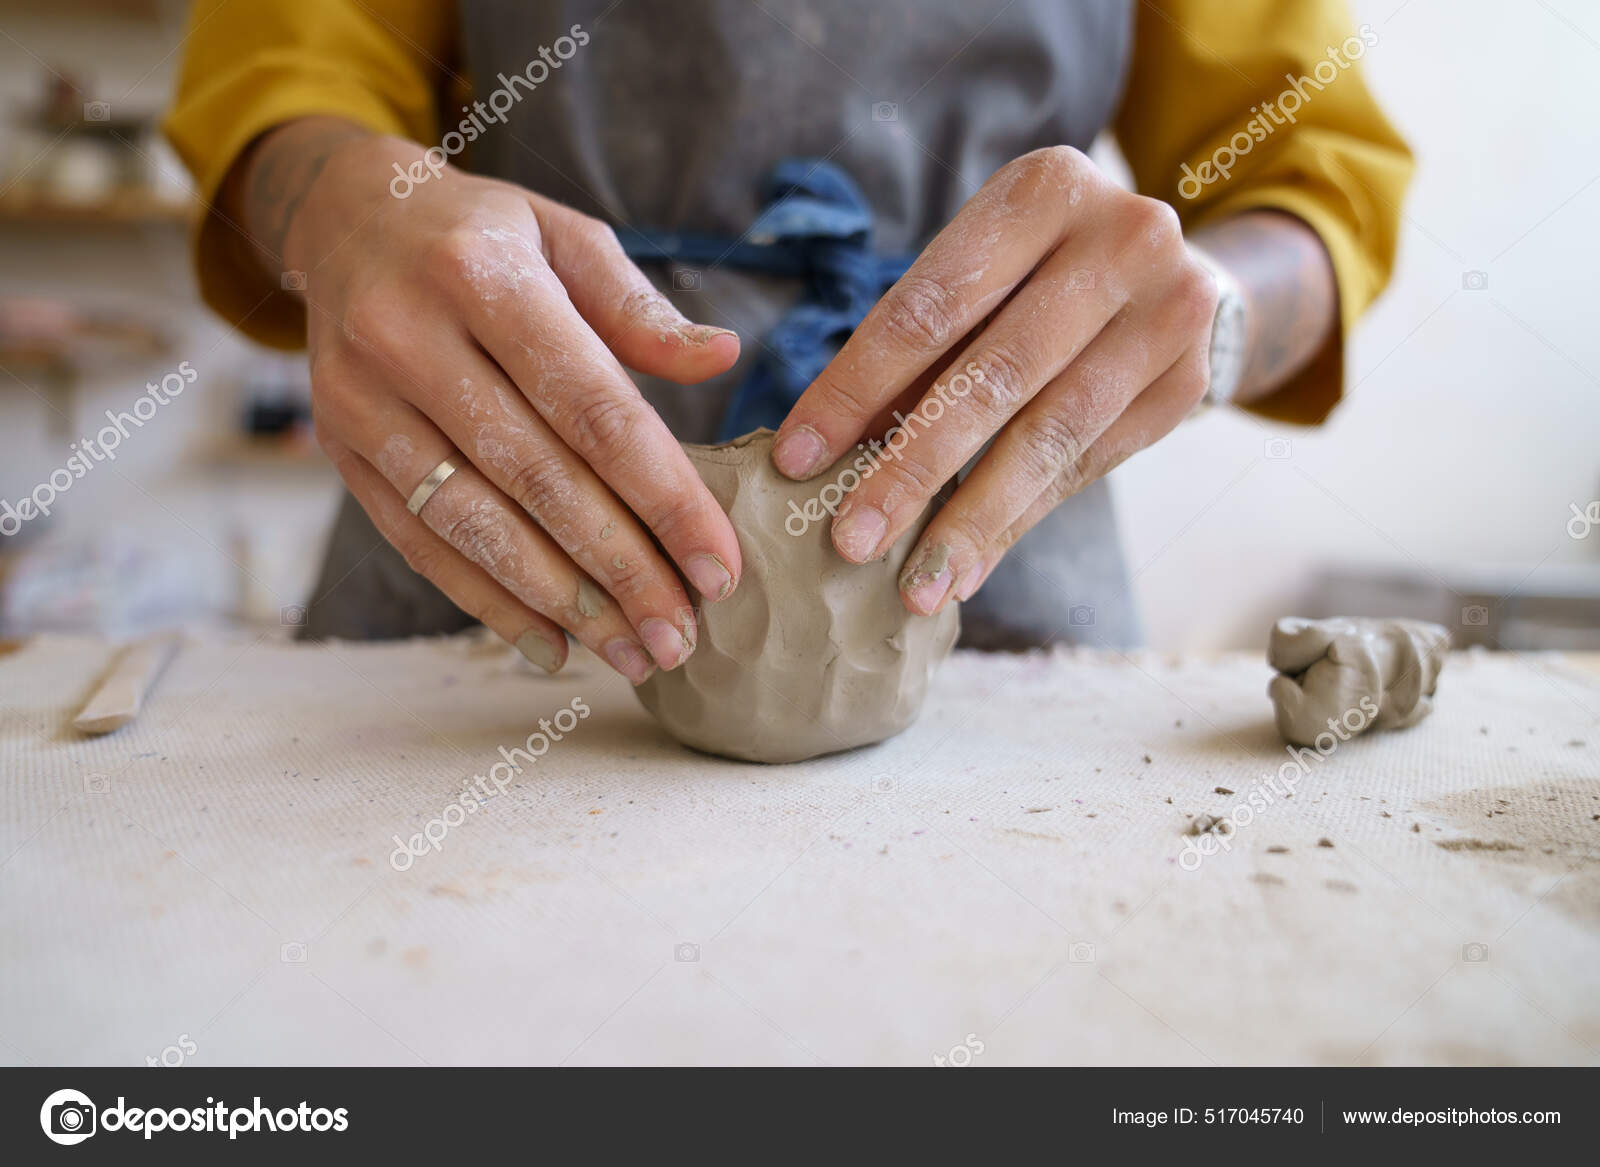 Clay Art Course - Hobby Workspace